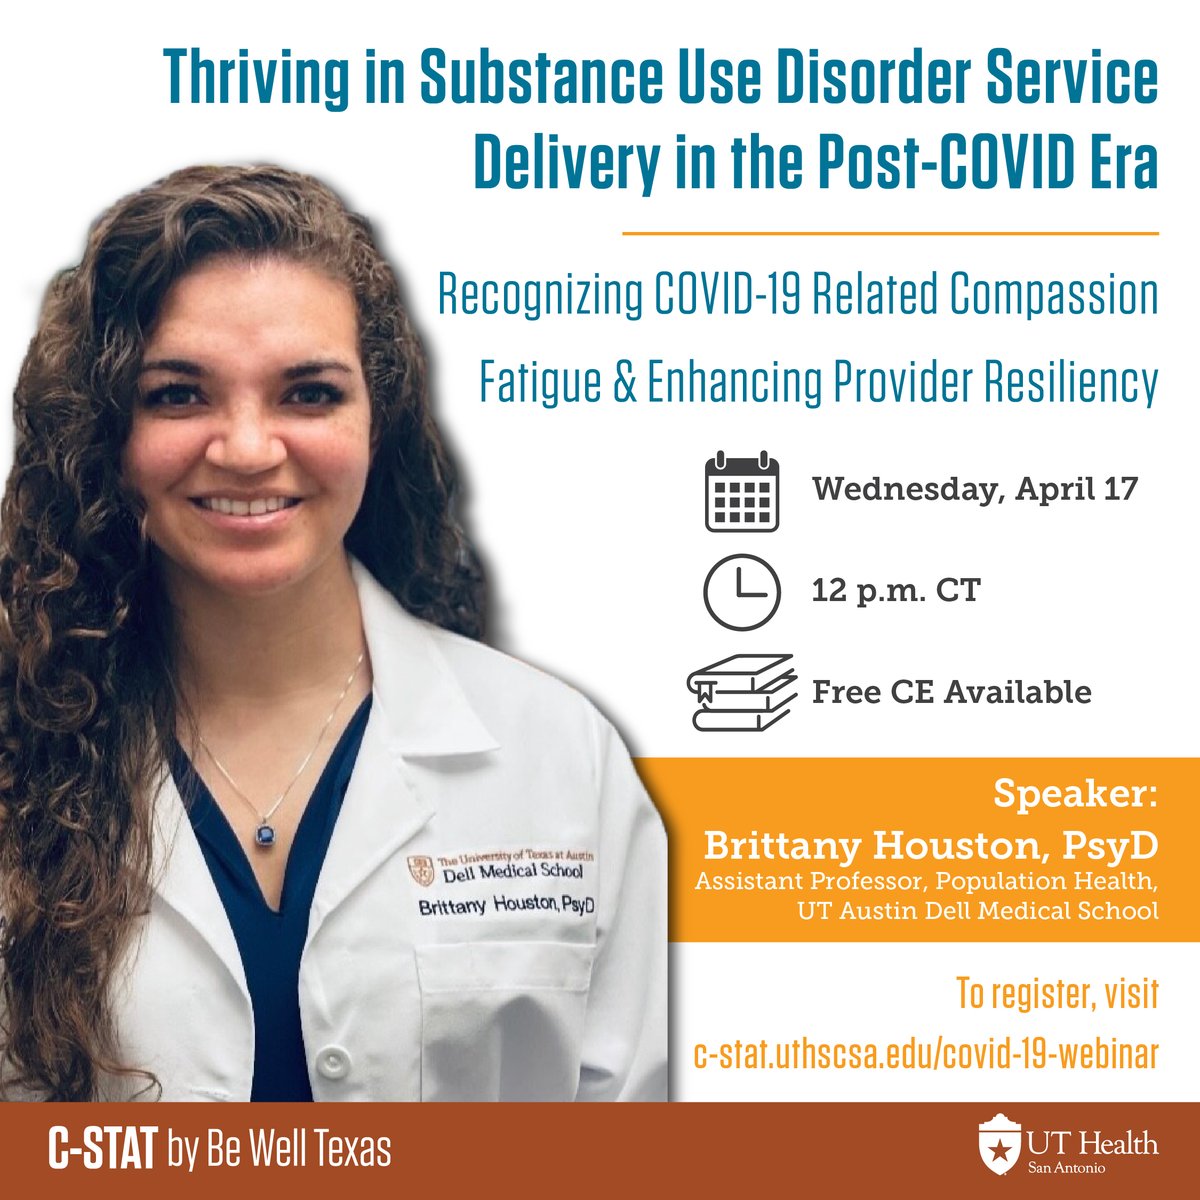 As we transition back to normal after #COVID19, we must consider the effect the #pandemic had on healthcare workers. ❤️‍🩹 Join Dr. Brittany Houston in a discussion on recognizing COVID-19-related compassion fatigue & enhancing provider resiliency on 4/17! c-stat.uthscsa.edu/covid-19-webin…